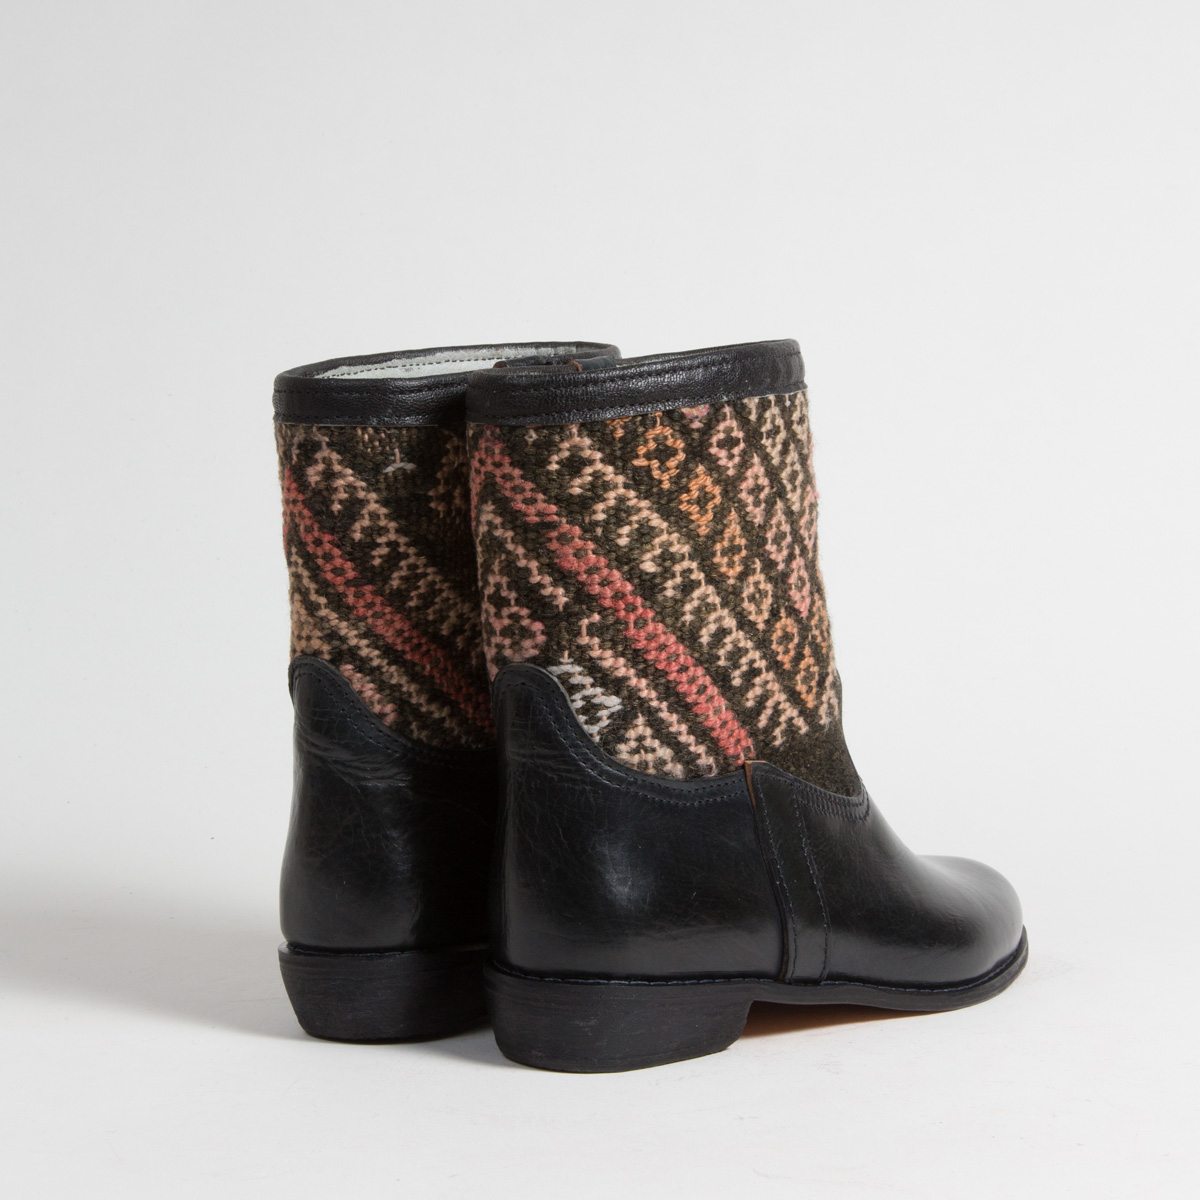 Bottines Kilim cuir mababouche artisanales (Réf. RPN30-42)